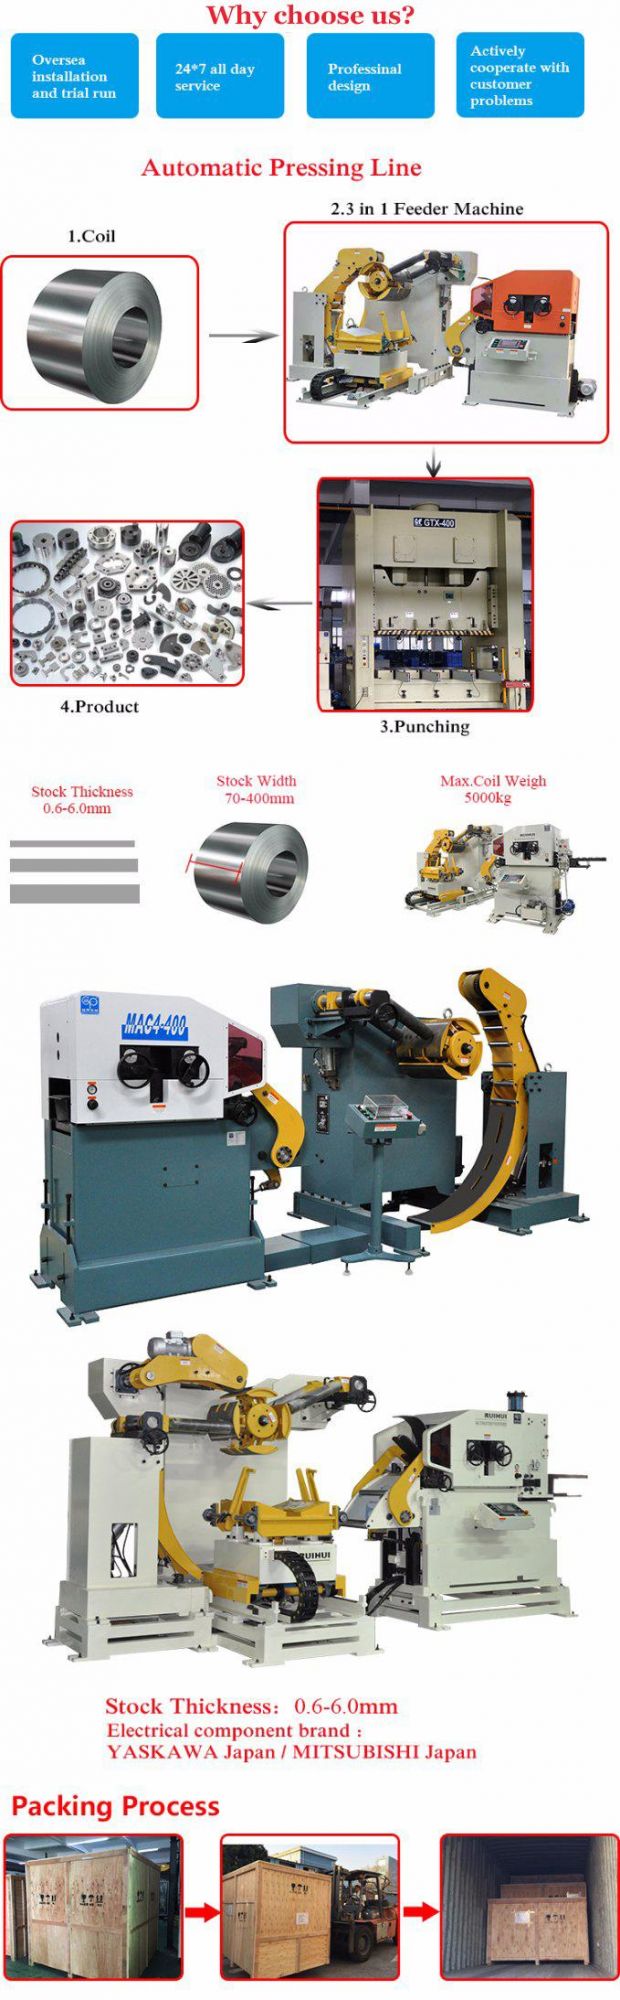 Straightener with Nc Servo Feeder and Uncoiler Use in Press Machine Help to Make Car Parts